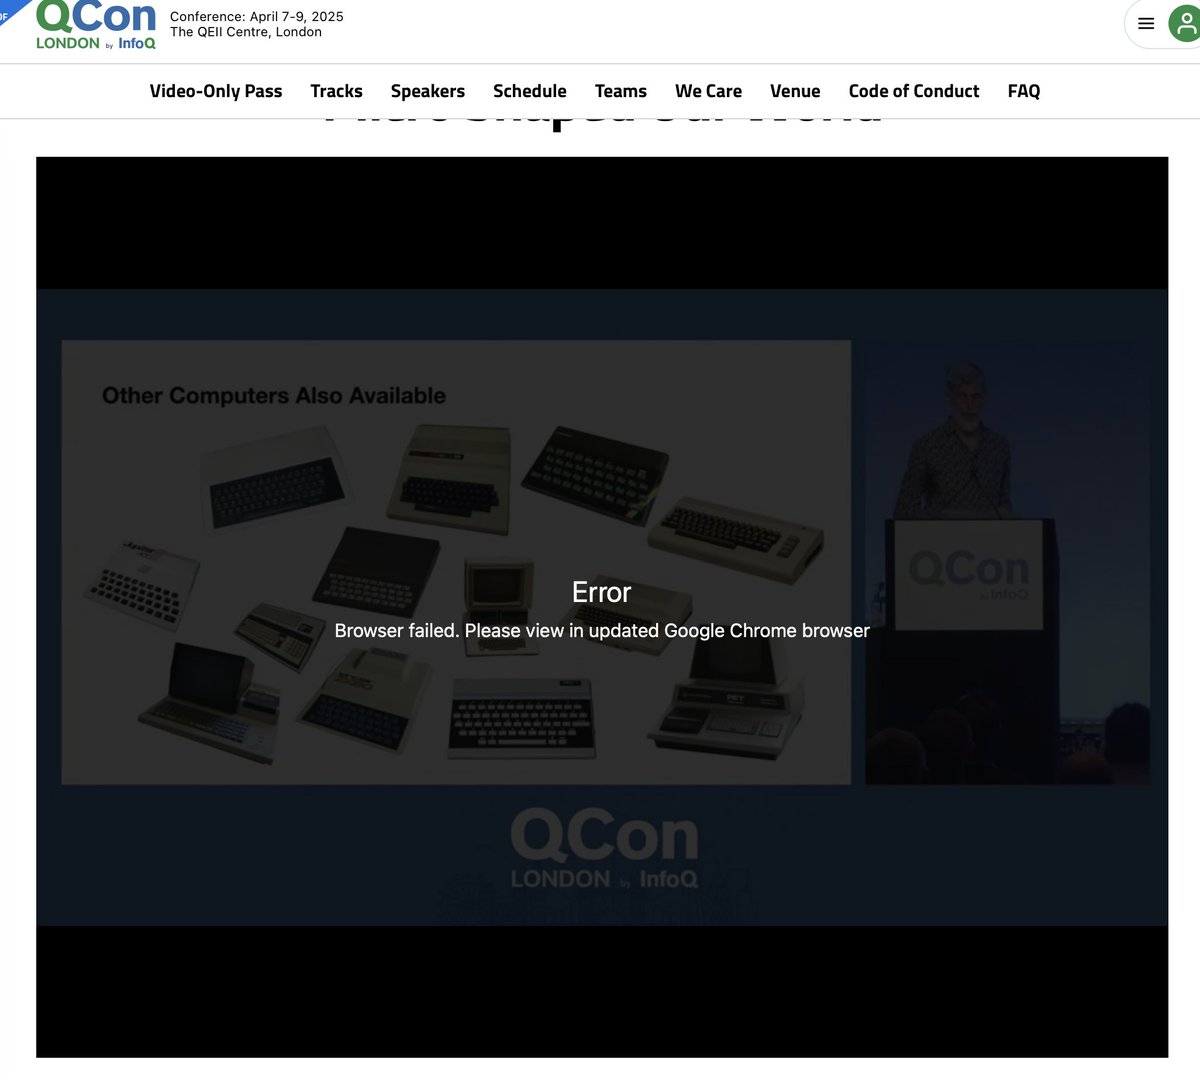 @QCon did you know your videos are not playing properly on Safari on MacOS (although they are fine with Safari on iPadOS?

This is very inconvenient; any suggestions (apart from use Chrome, which I don't want to do)